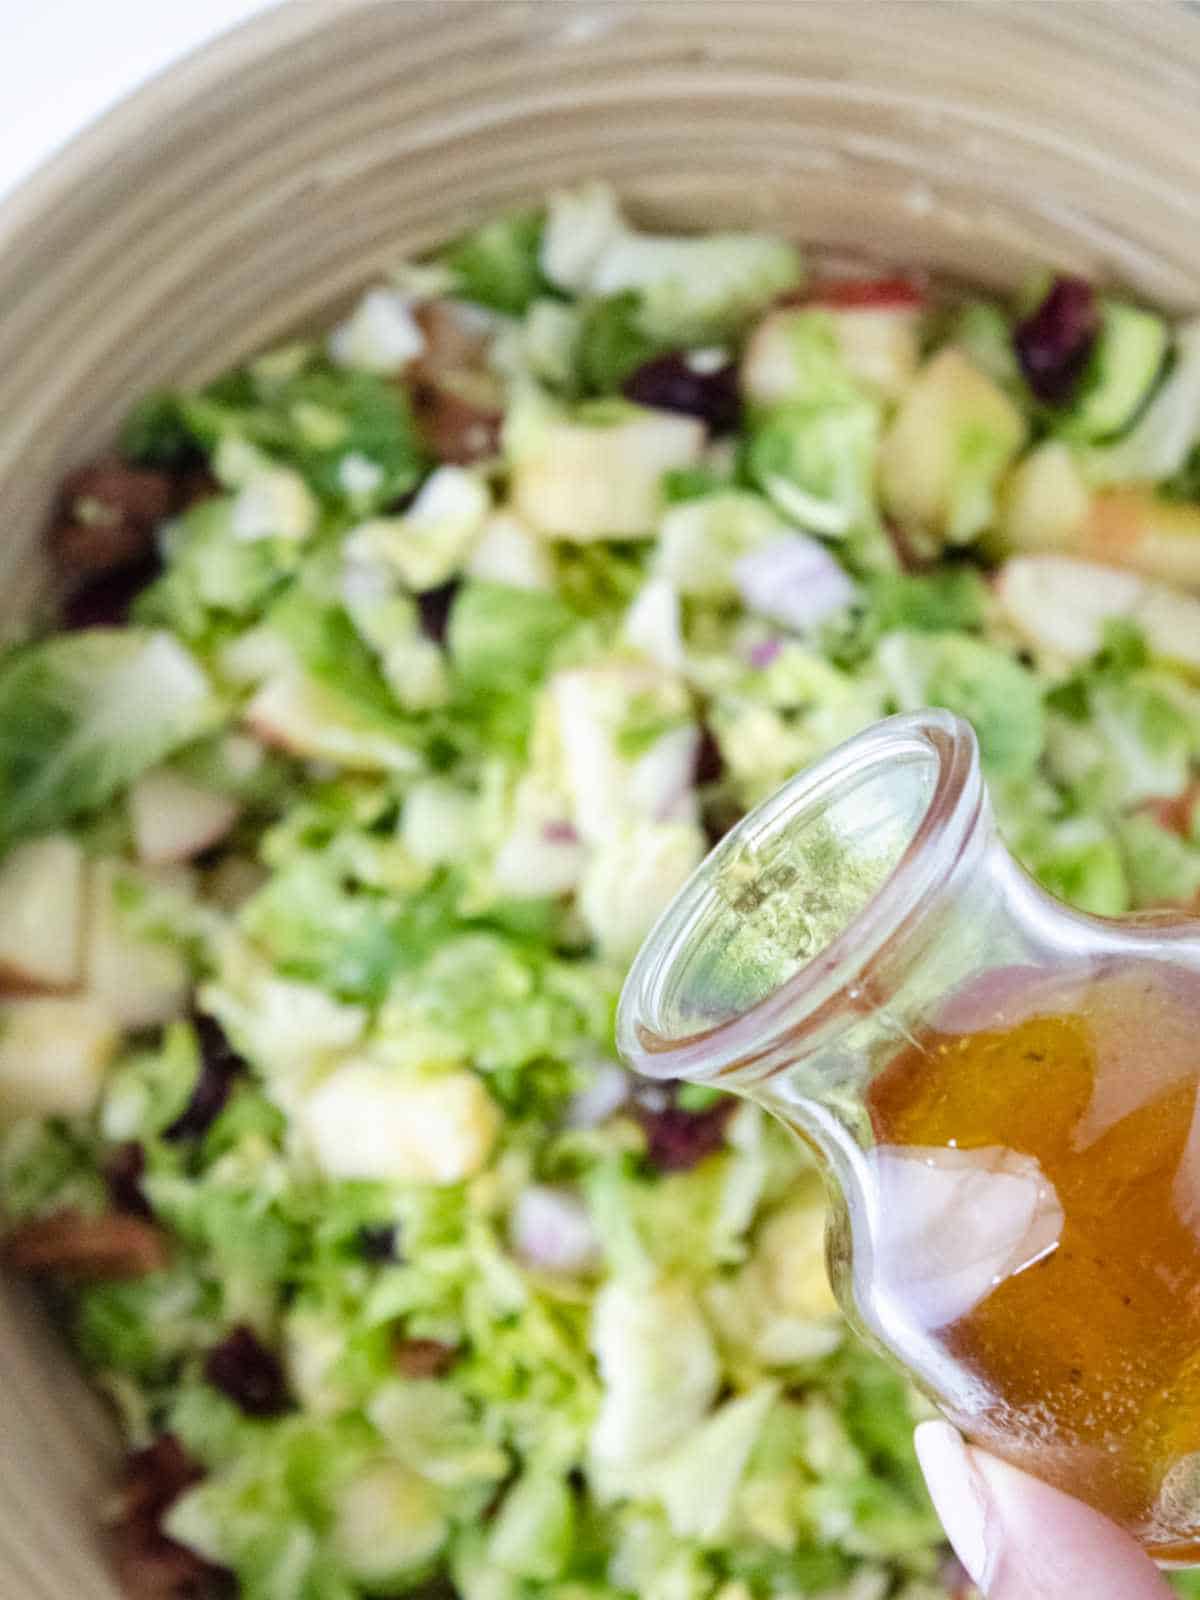 pouring warm salad dressing on brussel sprout salad.